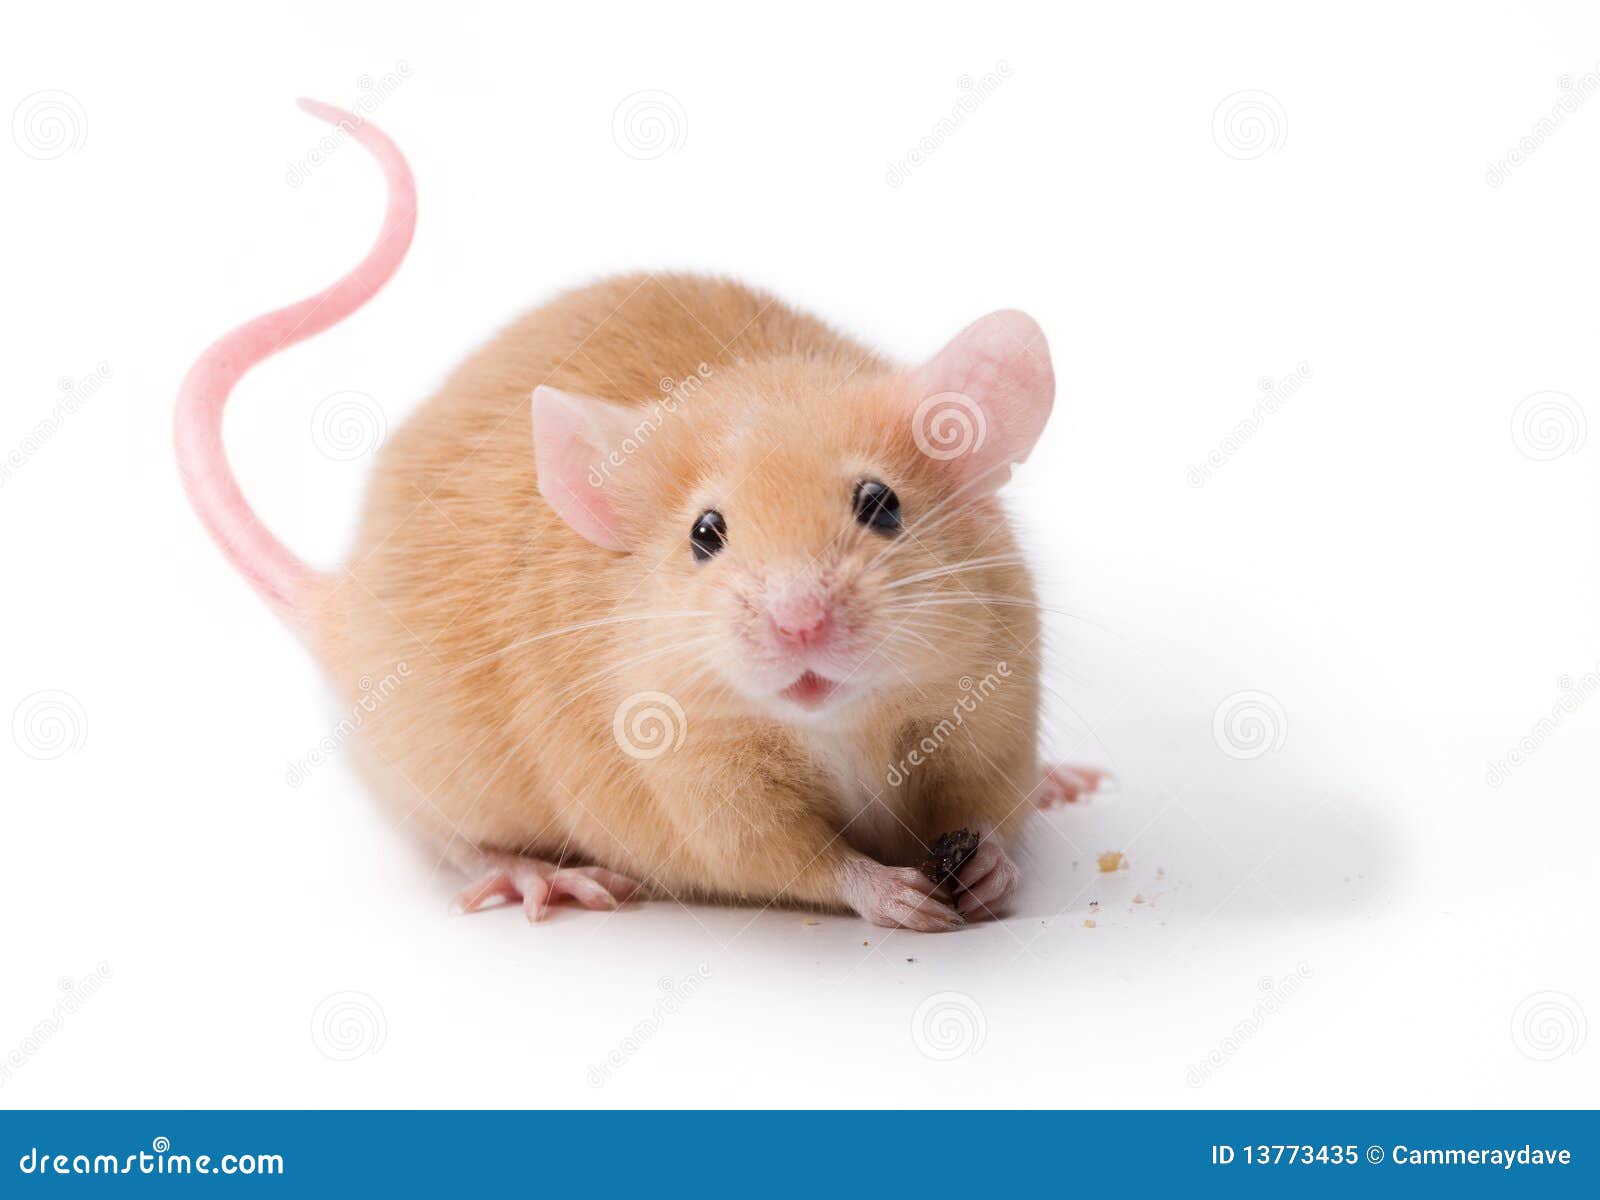 Pet Mouse Rodent Animal stock image. Image of mammal - 13773435